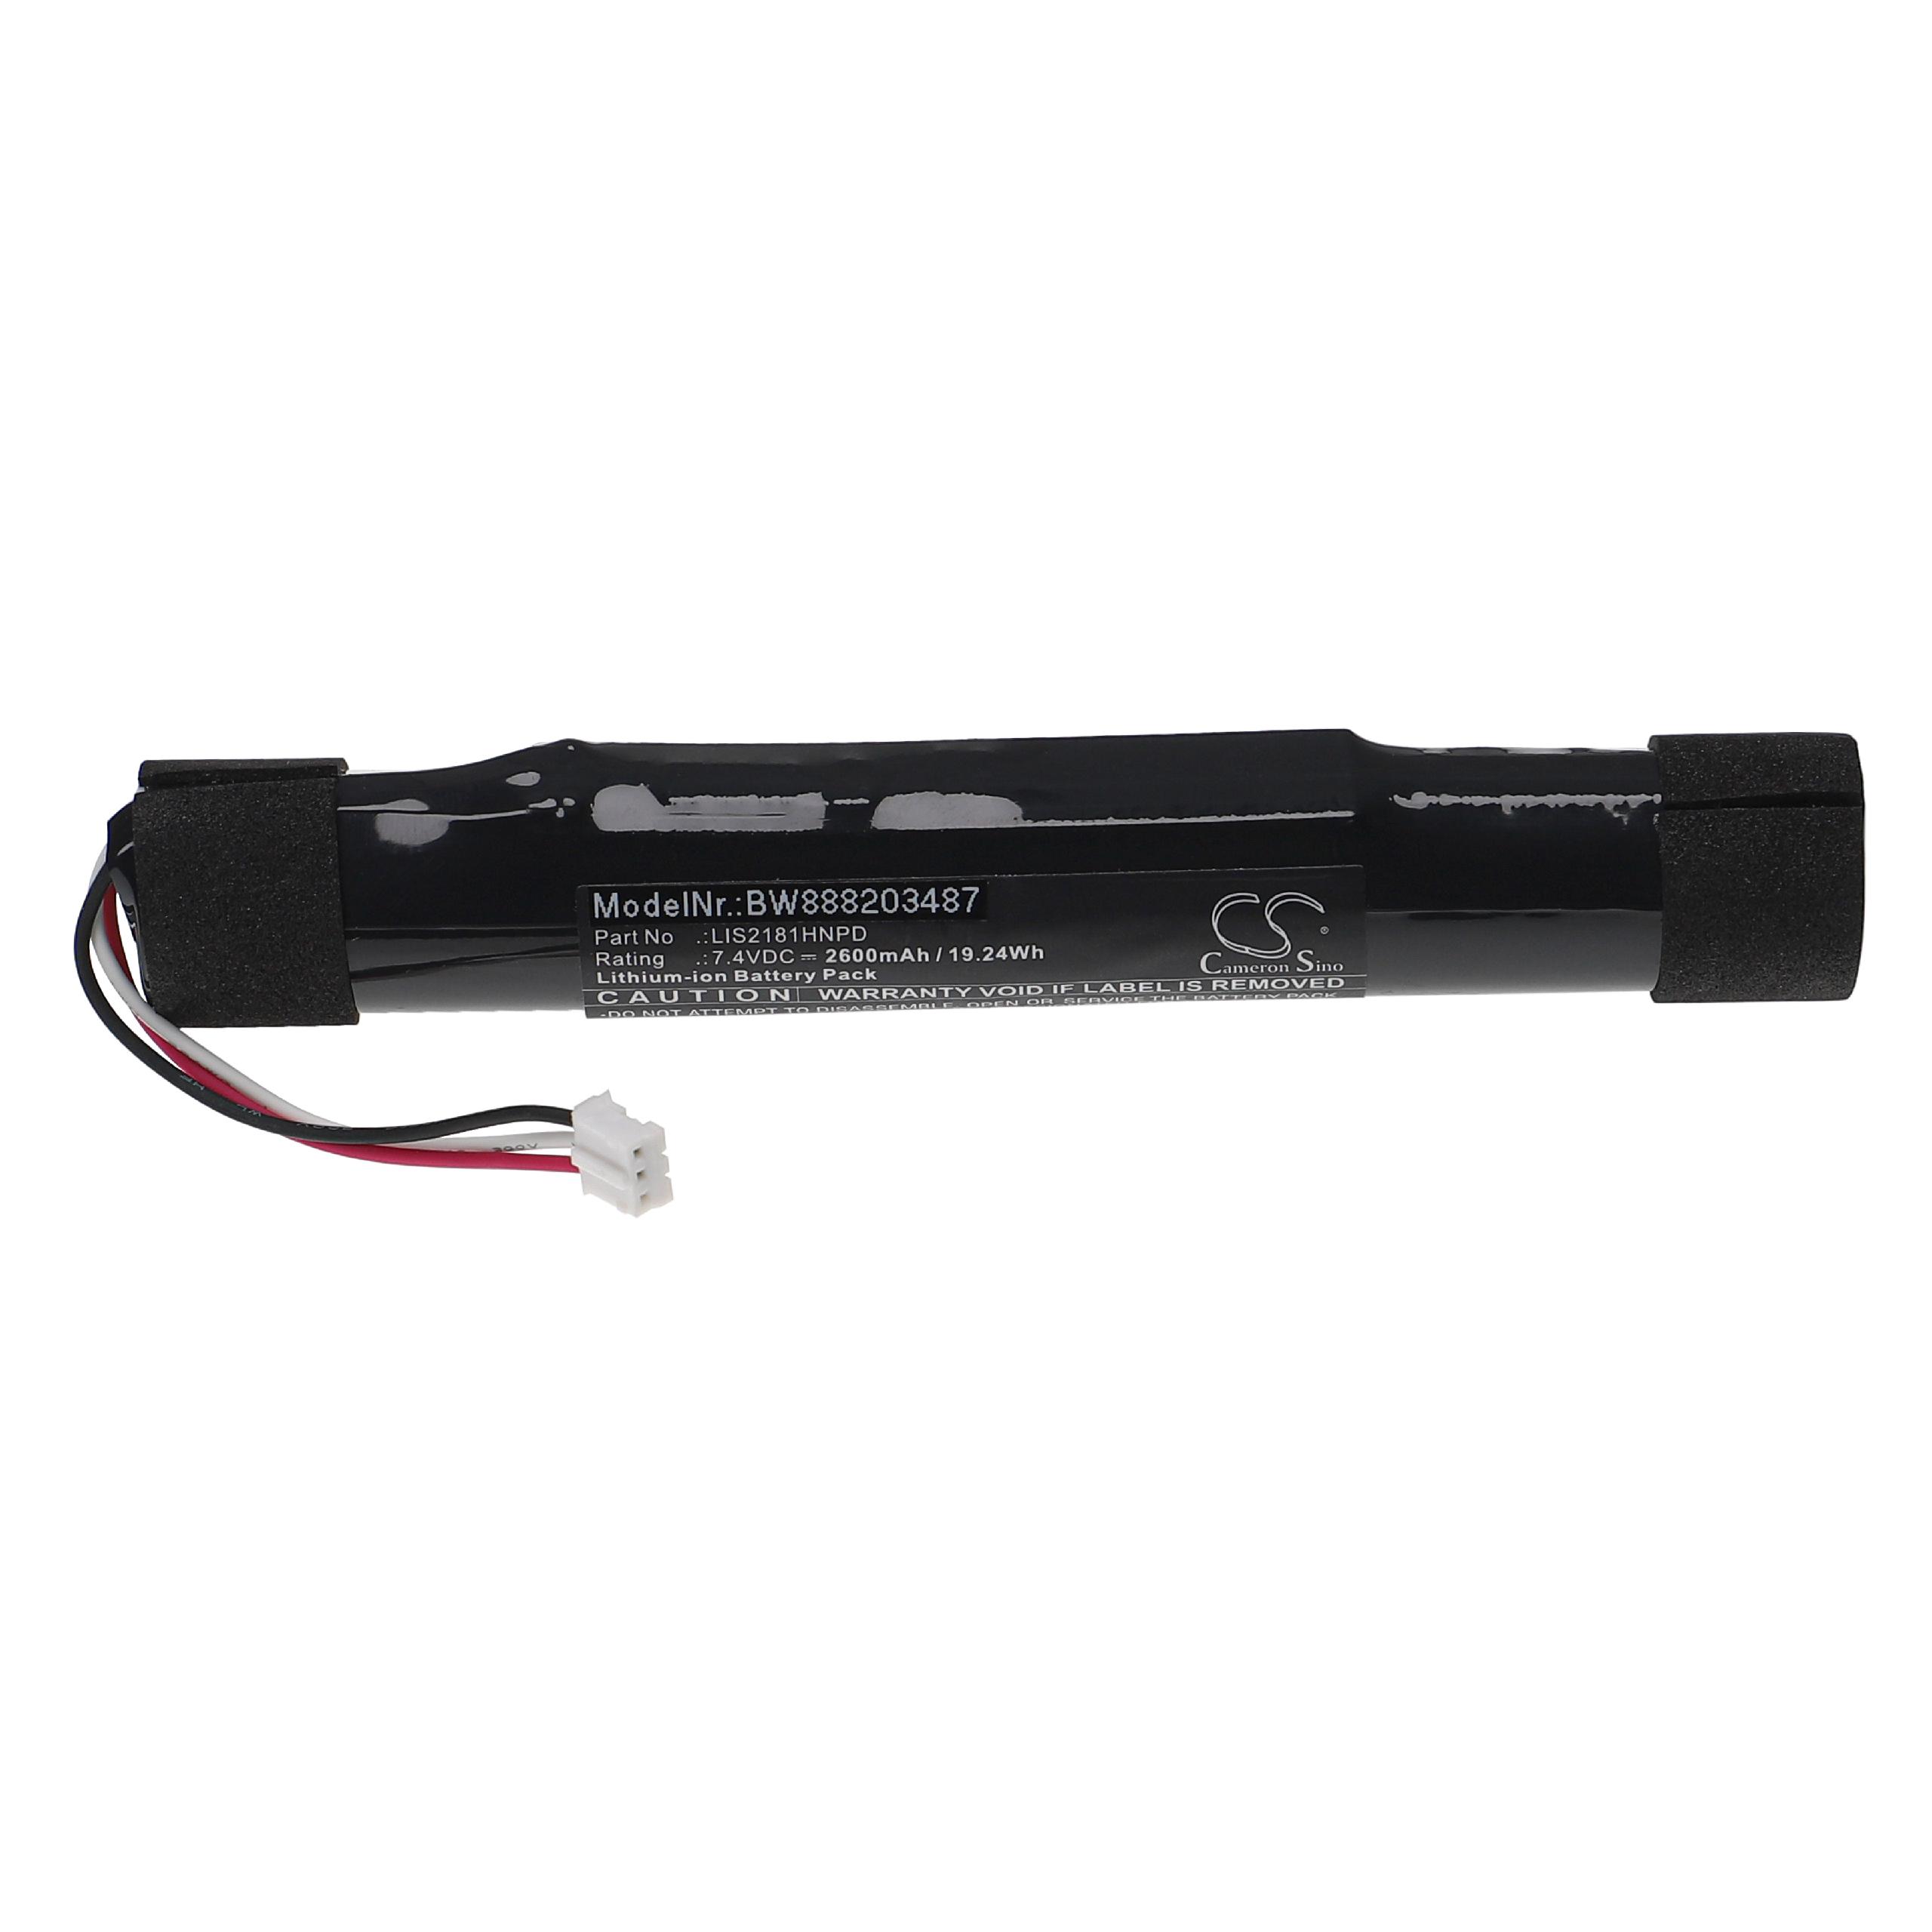  Battery replaces Sony LIS2181HNPD for SonyLoudspeaker - Li-Ion 2600 mAh 2 cells